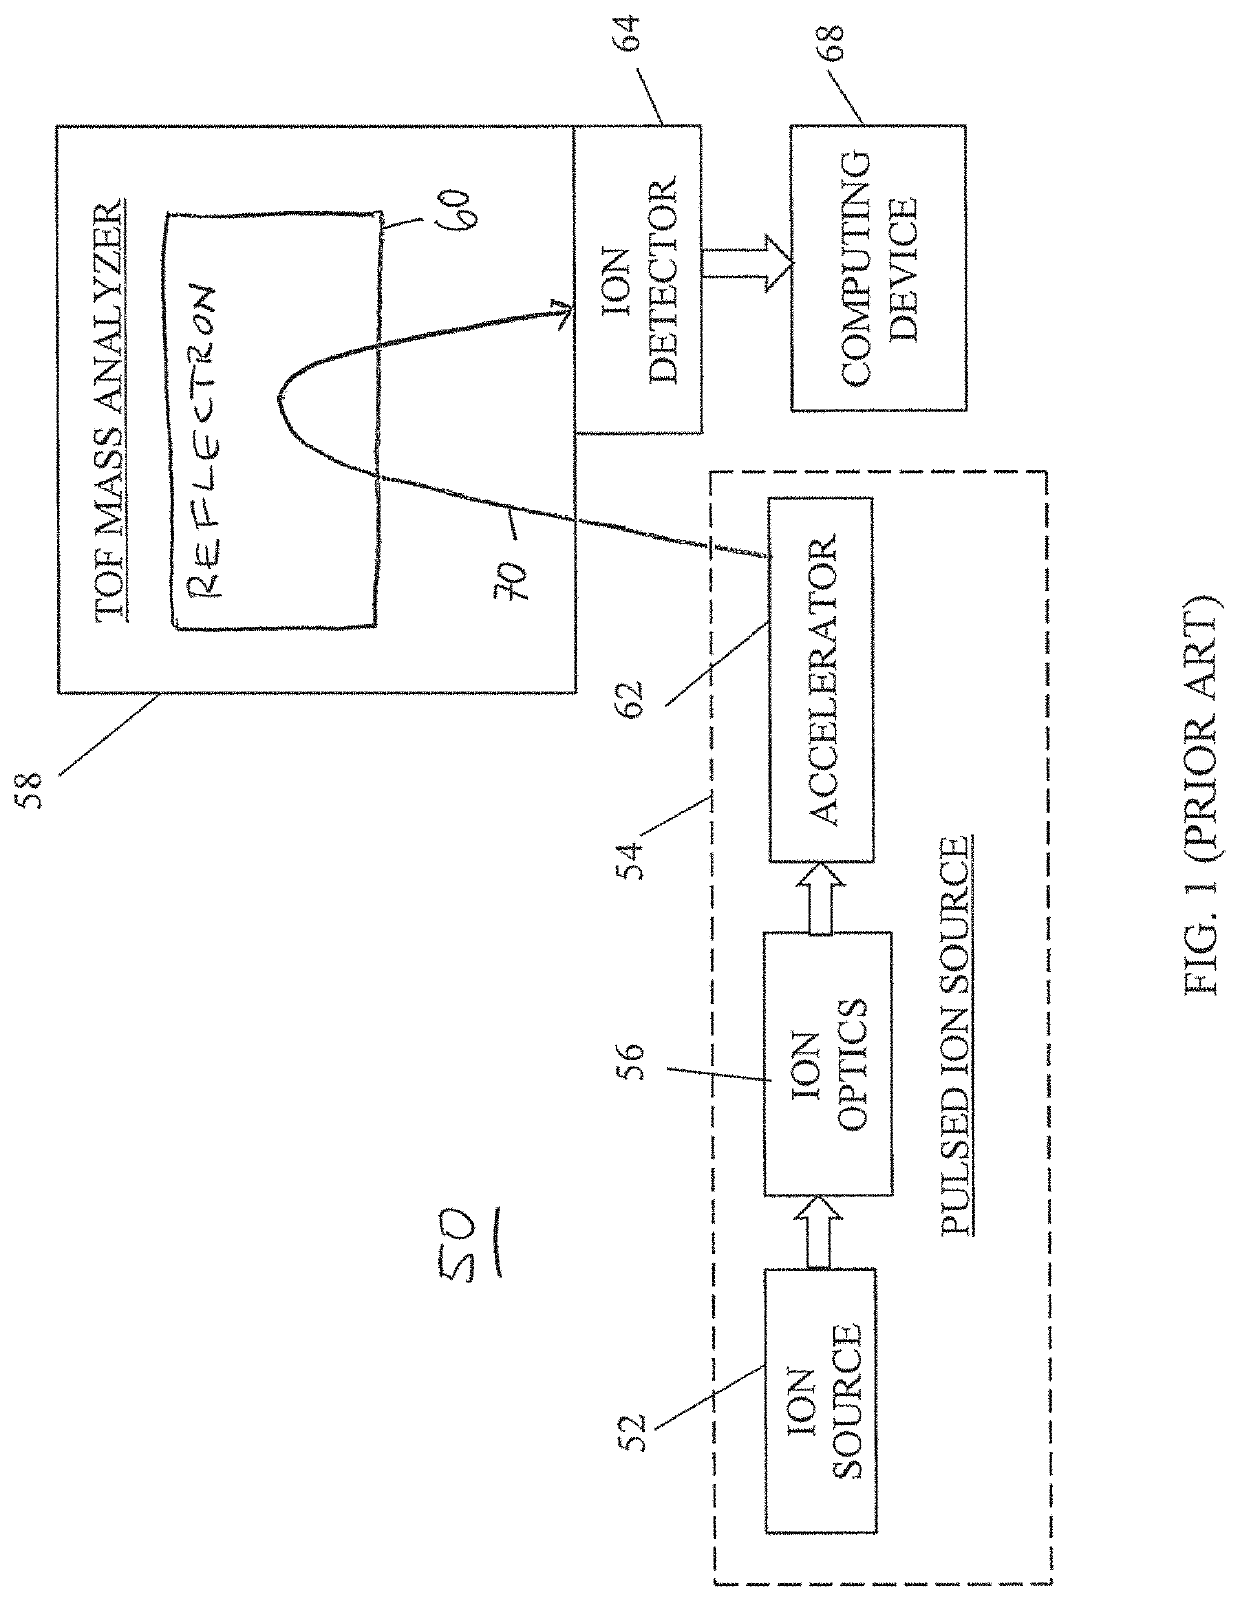 Multimode ion mirror prism and energy filtering apparatus and system for time-of-flight mass spectrometry